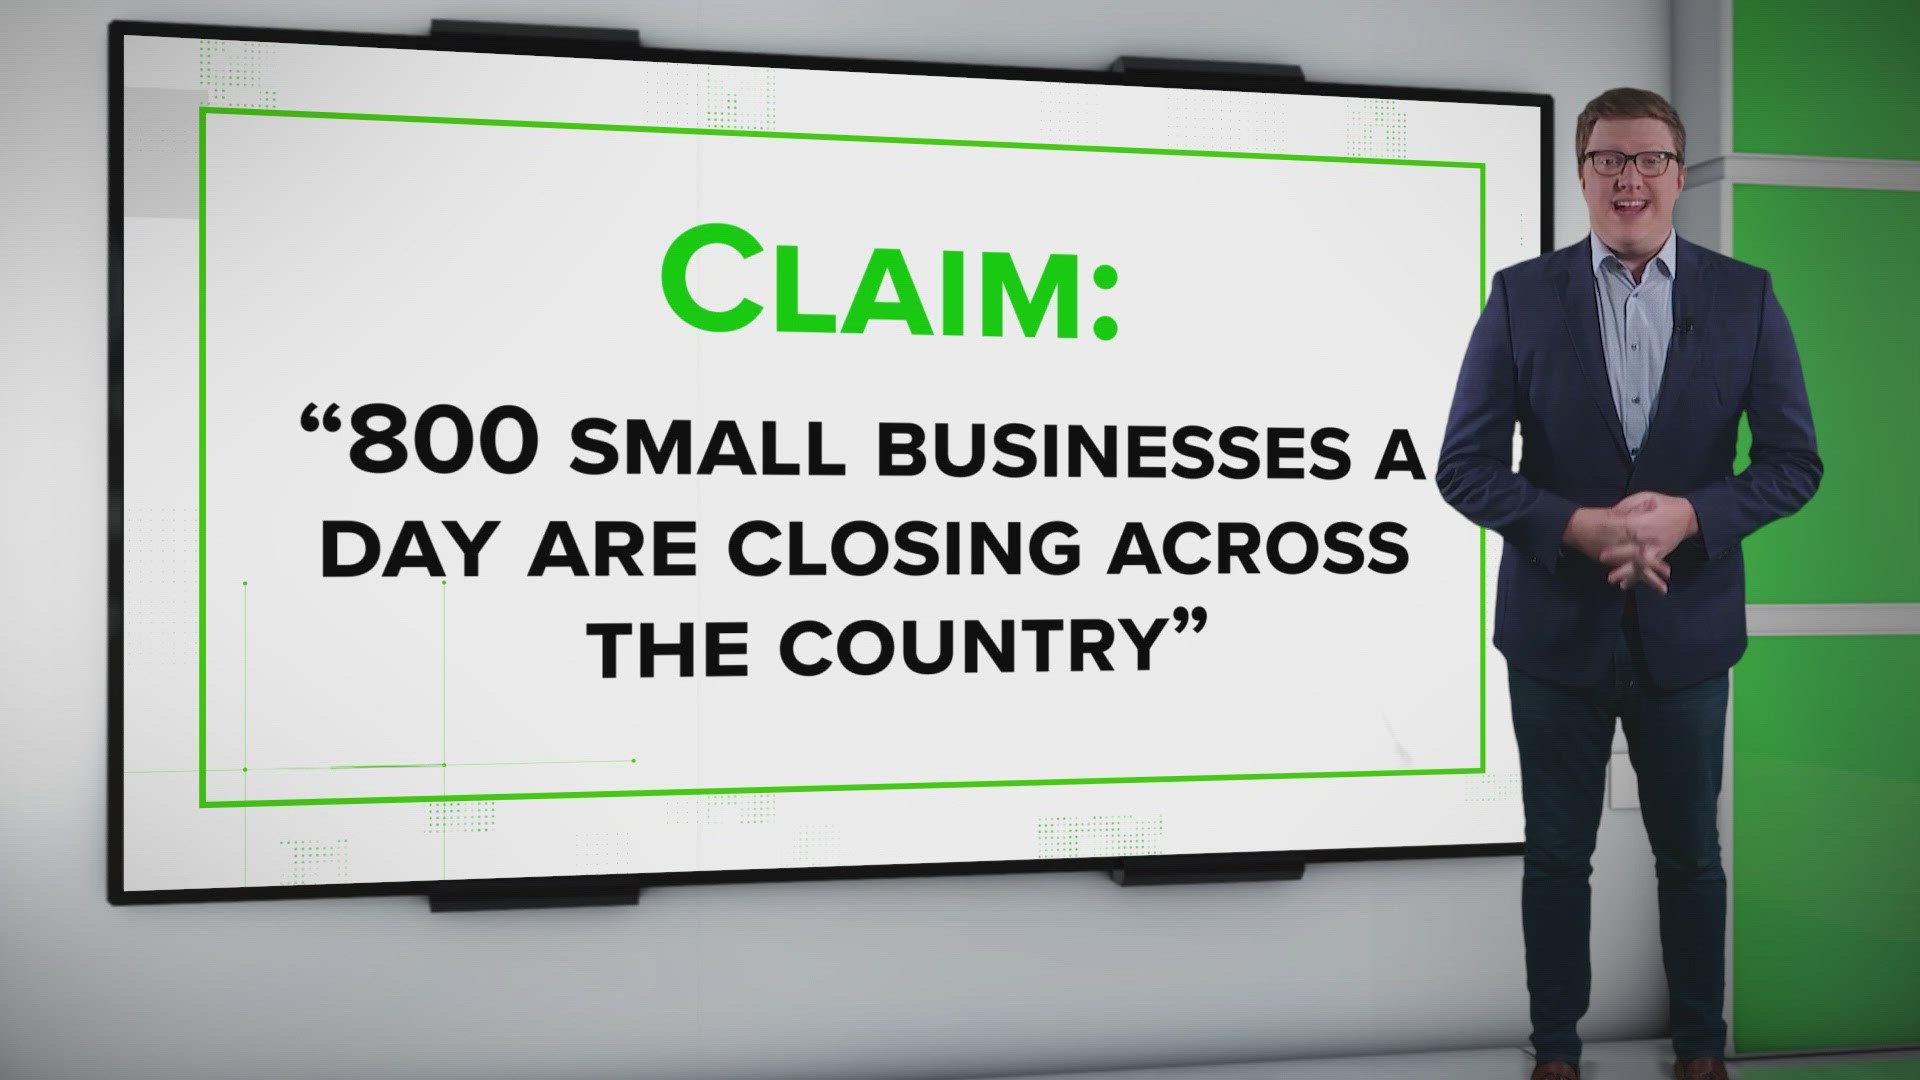 One study says 800 small businesses are closing a day, but different studies give different numbers and the official numbers won't be known for some time.